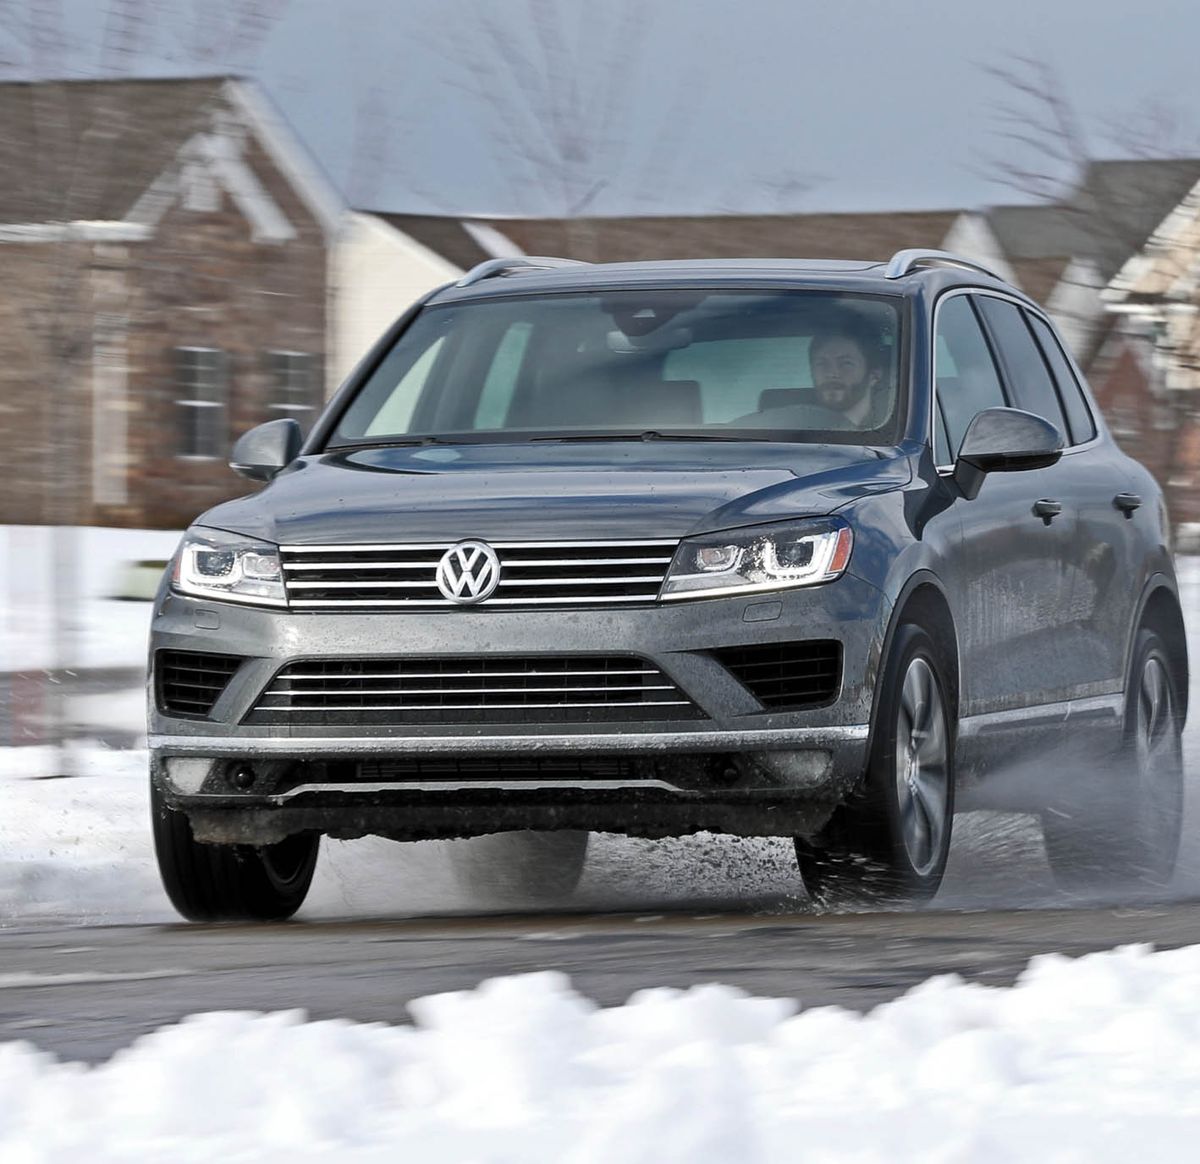 Volkswagen Touareg SUV: Models, Generations and Details